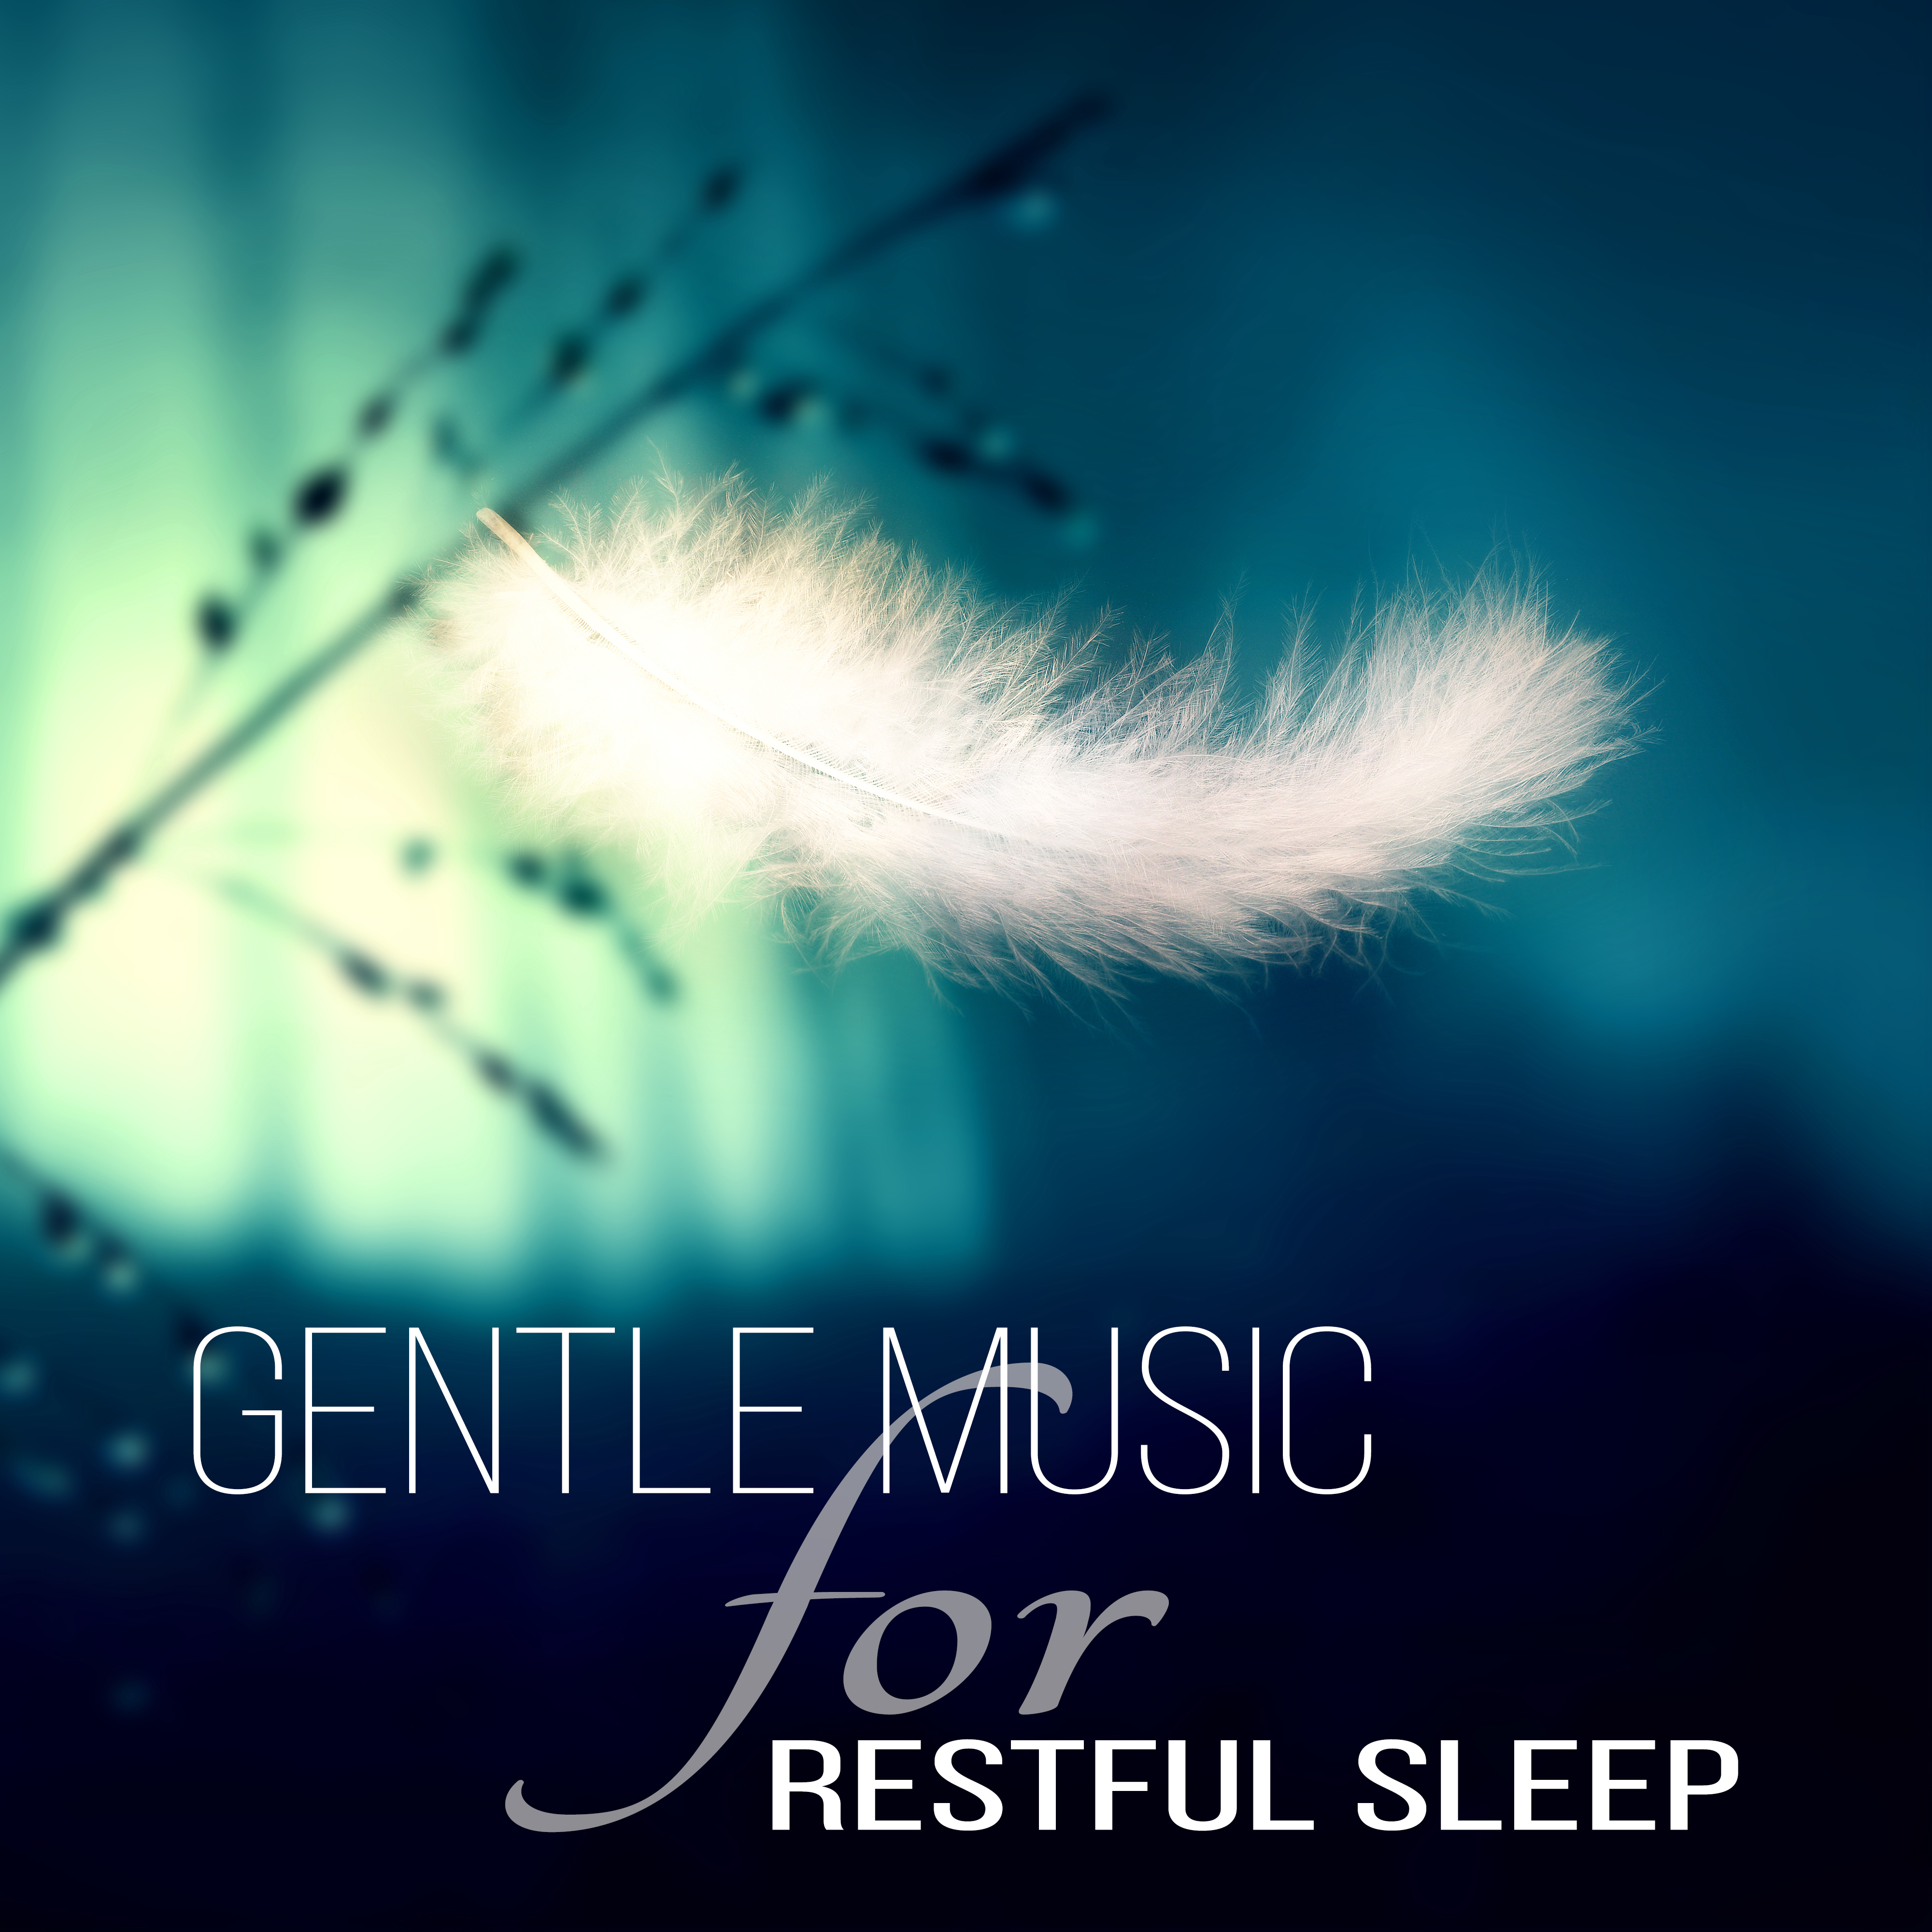 Gentle Music for Restful Sleep - Music for Stress Relief and Trouble Sleeping, Therapy Music with Nature Sounds, Relaxing Background Music